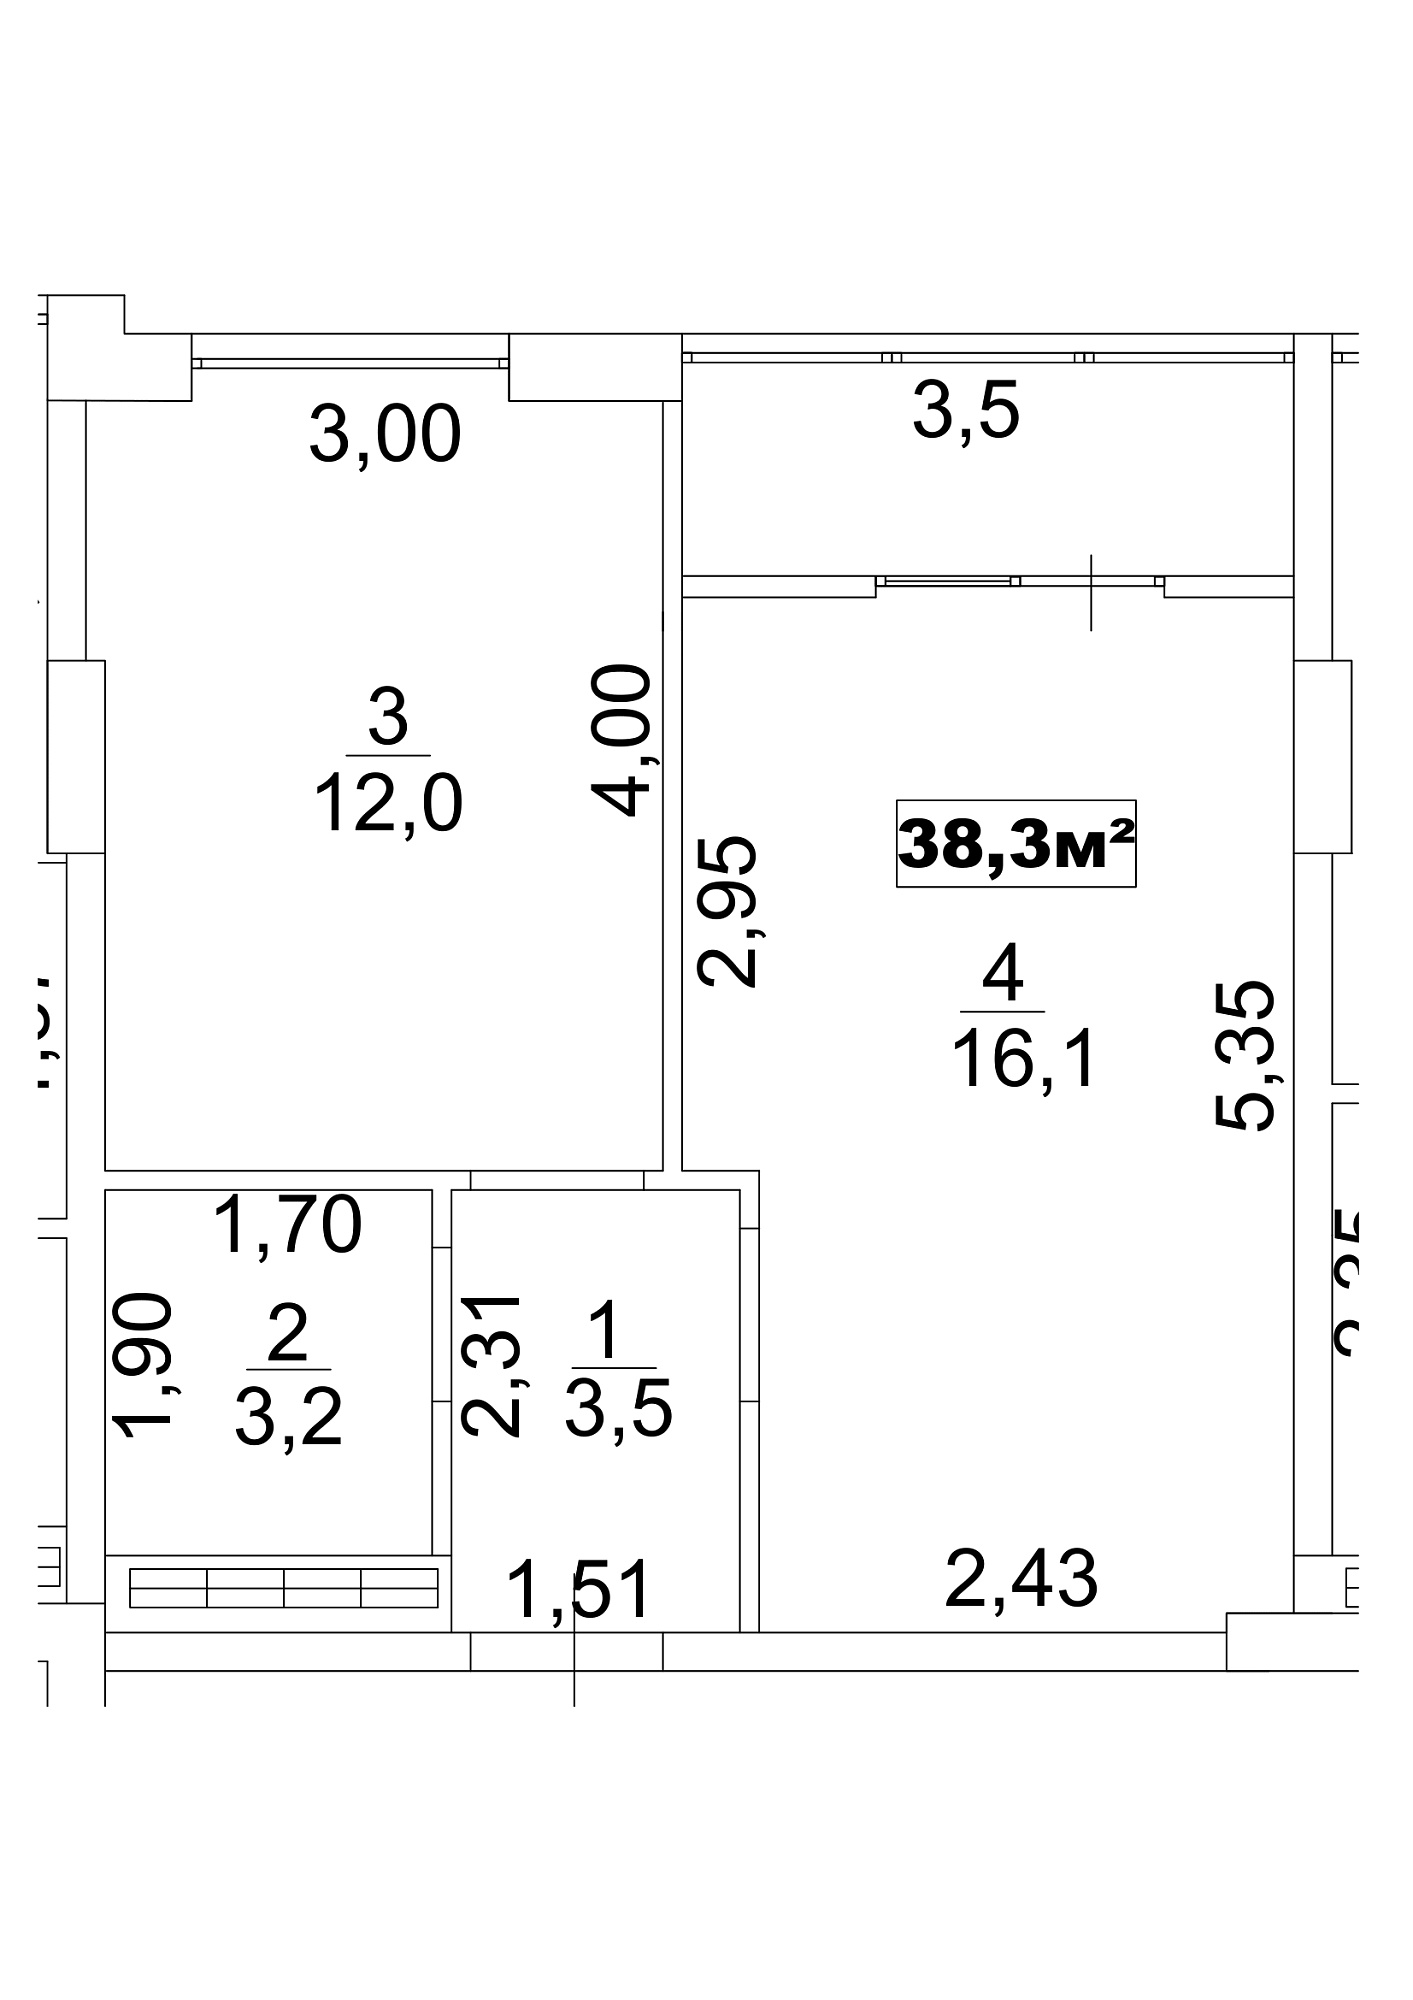 Planning 1-rm flats area 38.3m2, AB-13-09/00075.